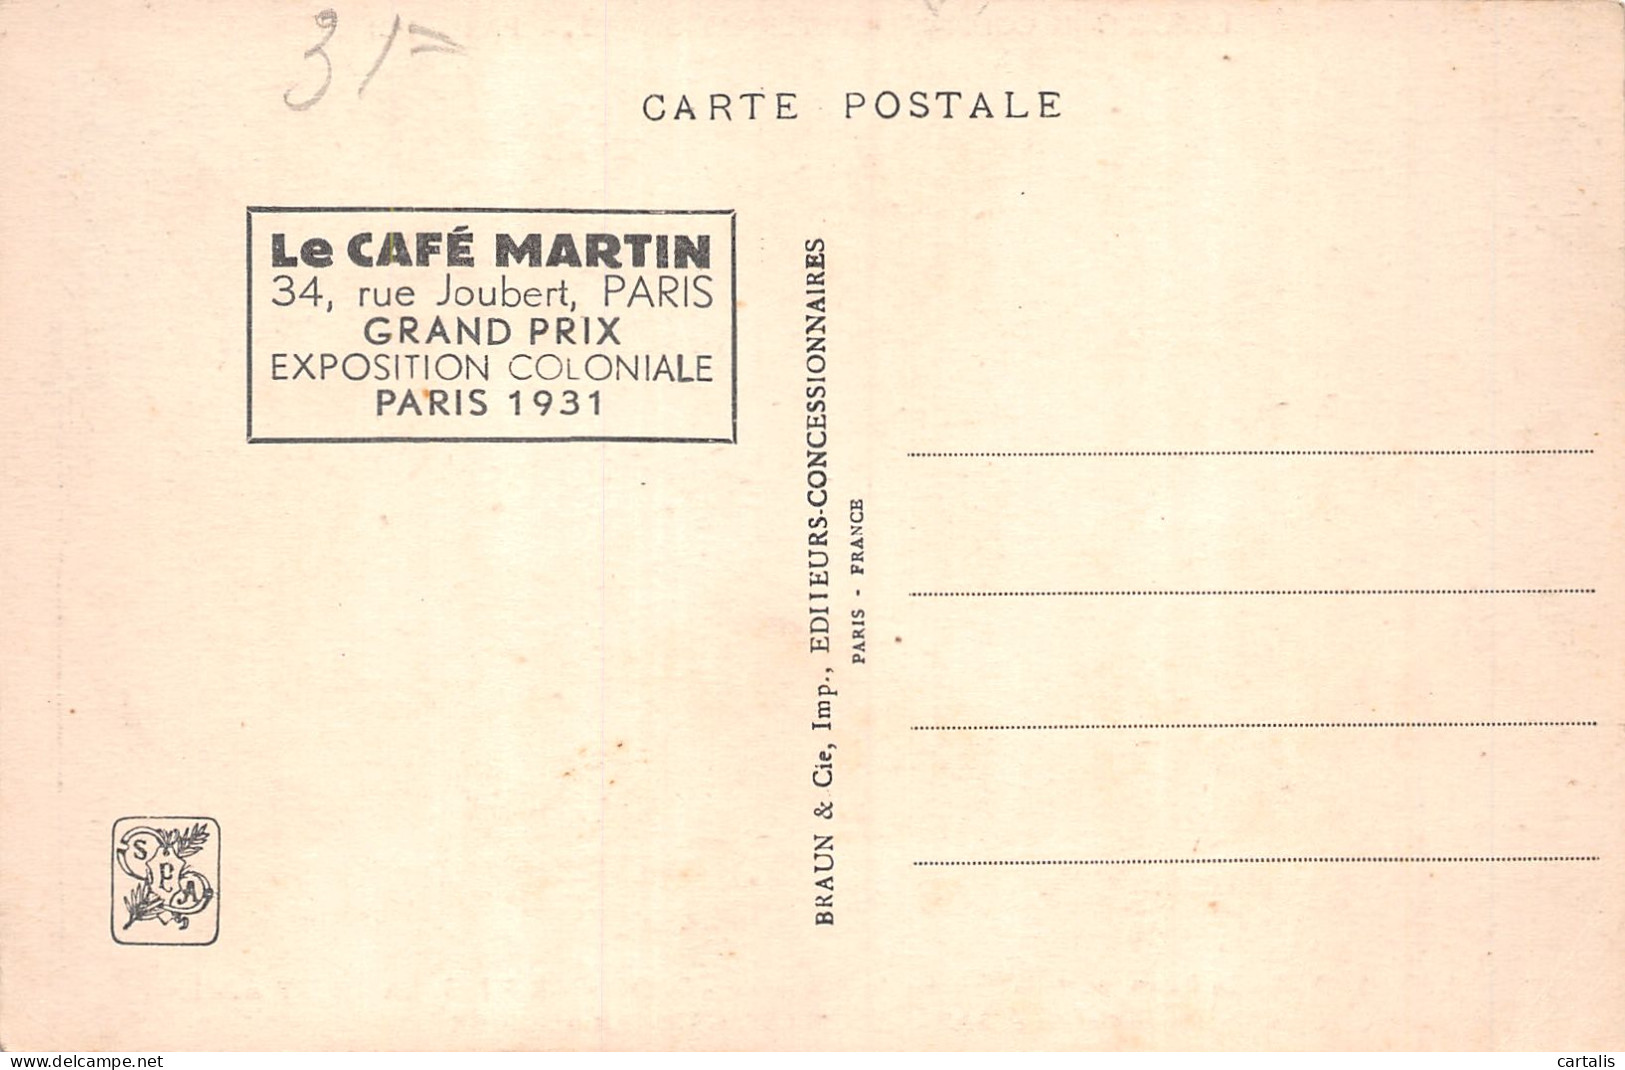 75-PARIS EXPO COLONIALE INTERNATIONALE 1931 A O F -N°4226-A/0345 - Mostre